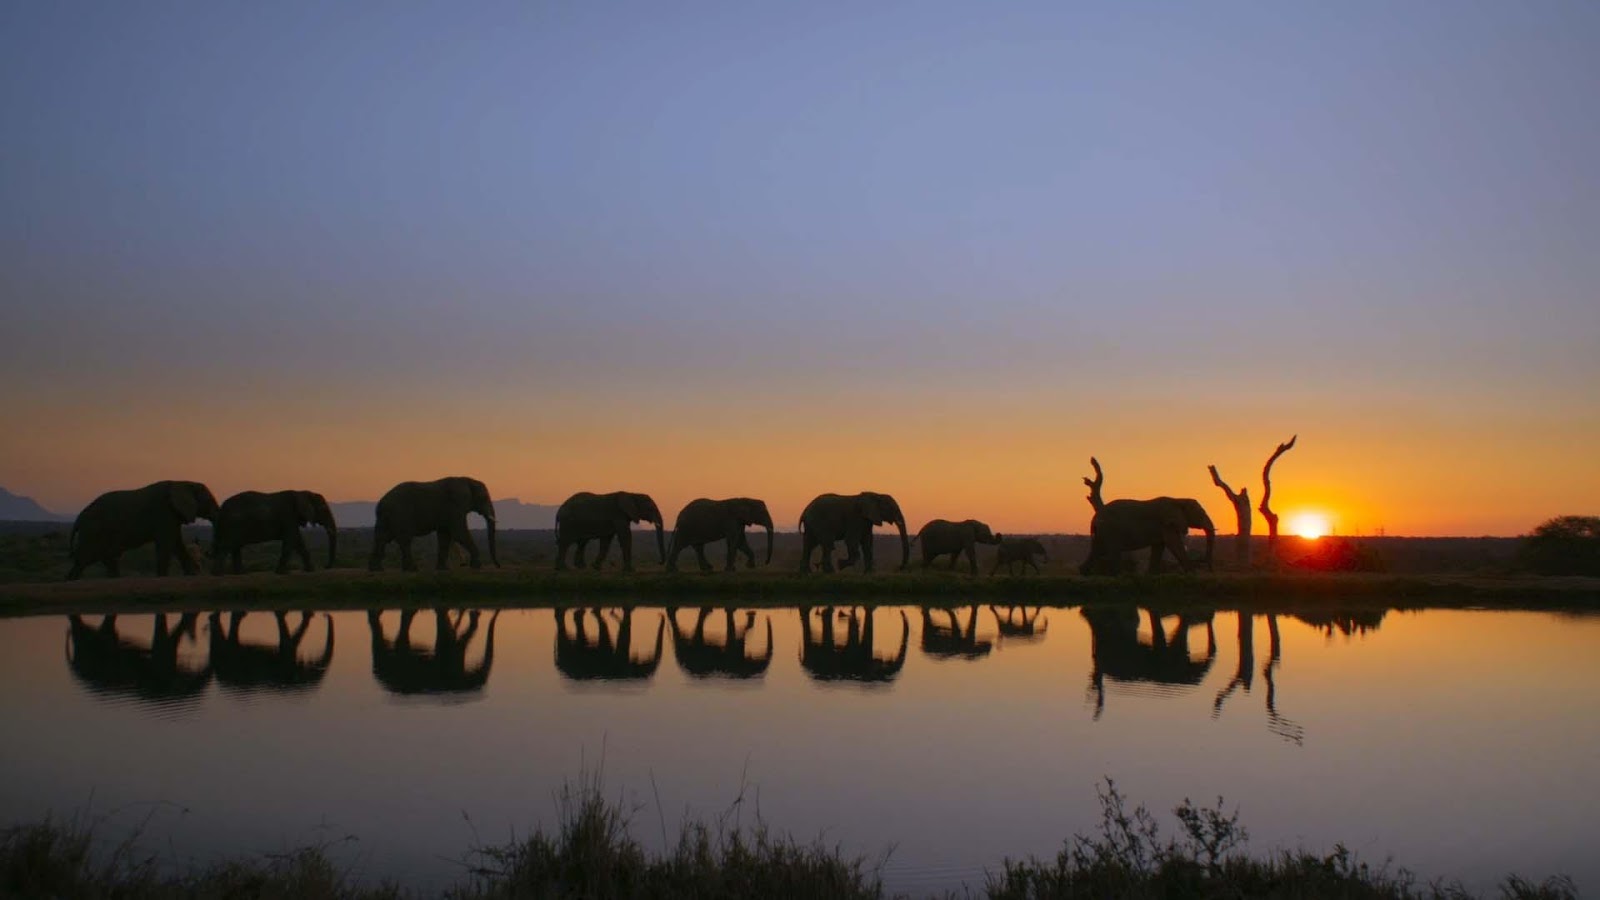 A group of elephants walking along a body of water

Description automatically generated